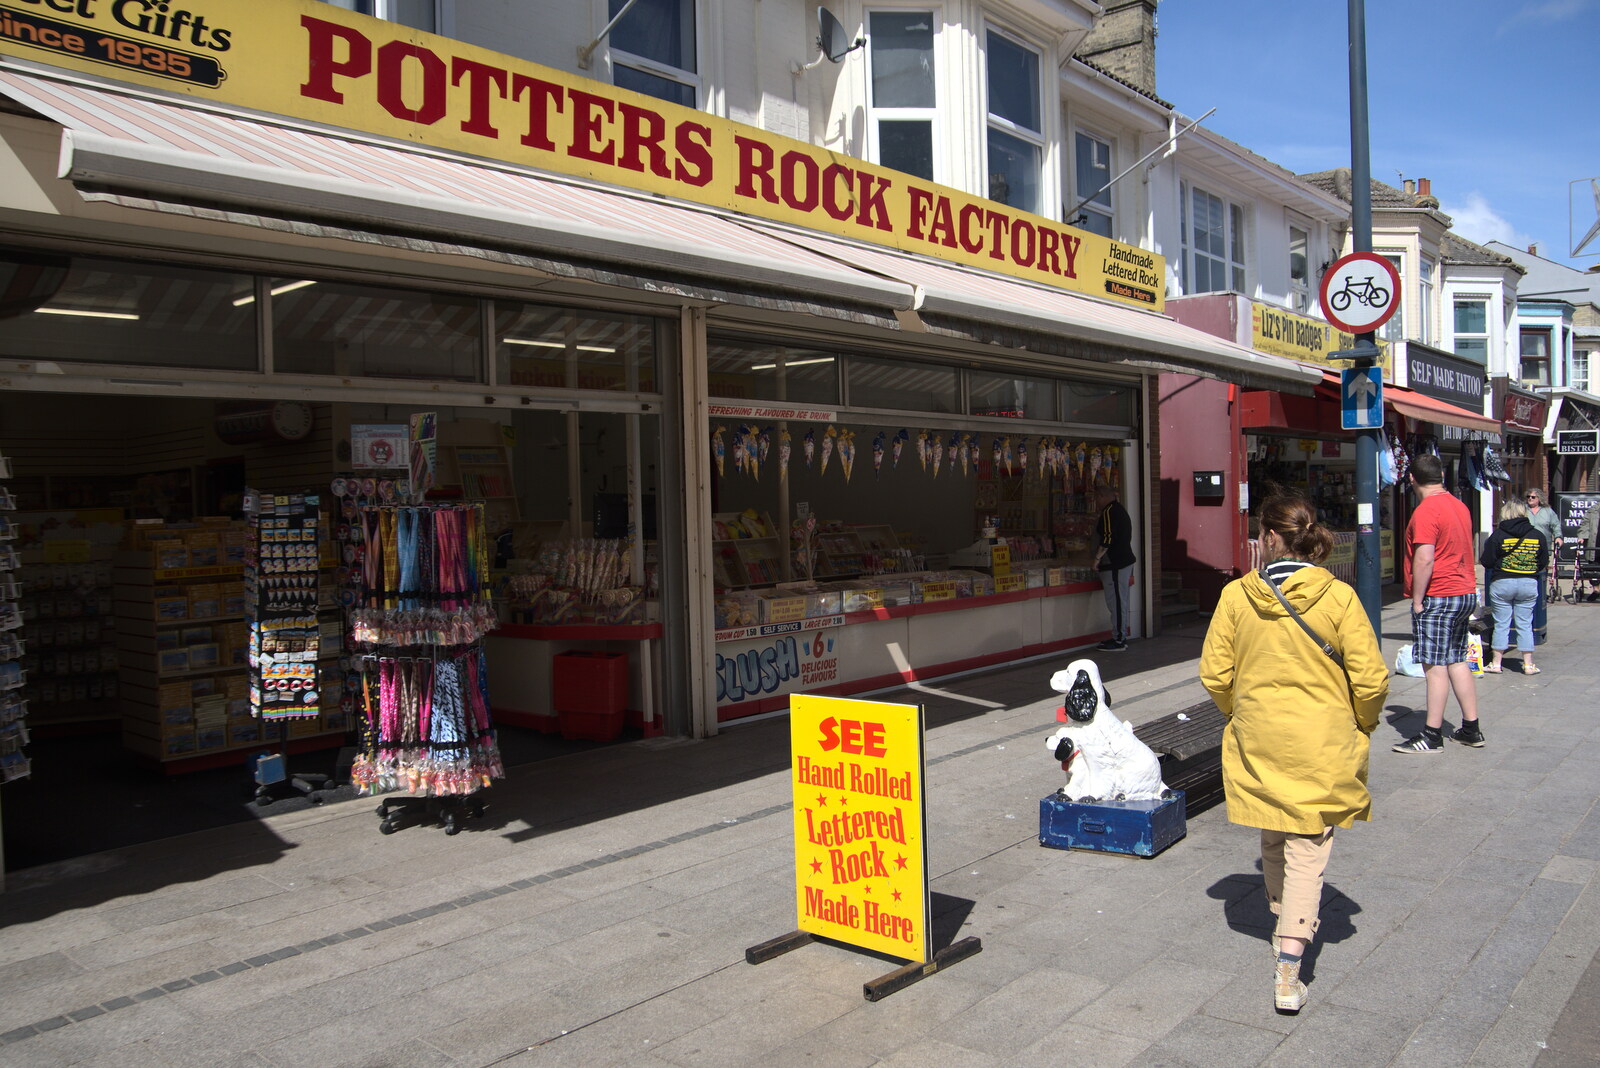 We walk past the Potters Rock Factory from Faded Seaside Glamour: A Weekend in Great Yarmouth, Norfolk - 29th May 2022